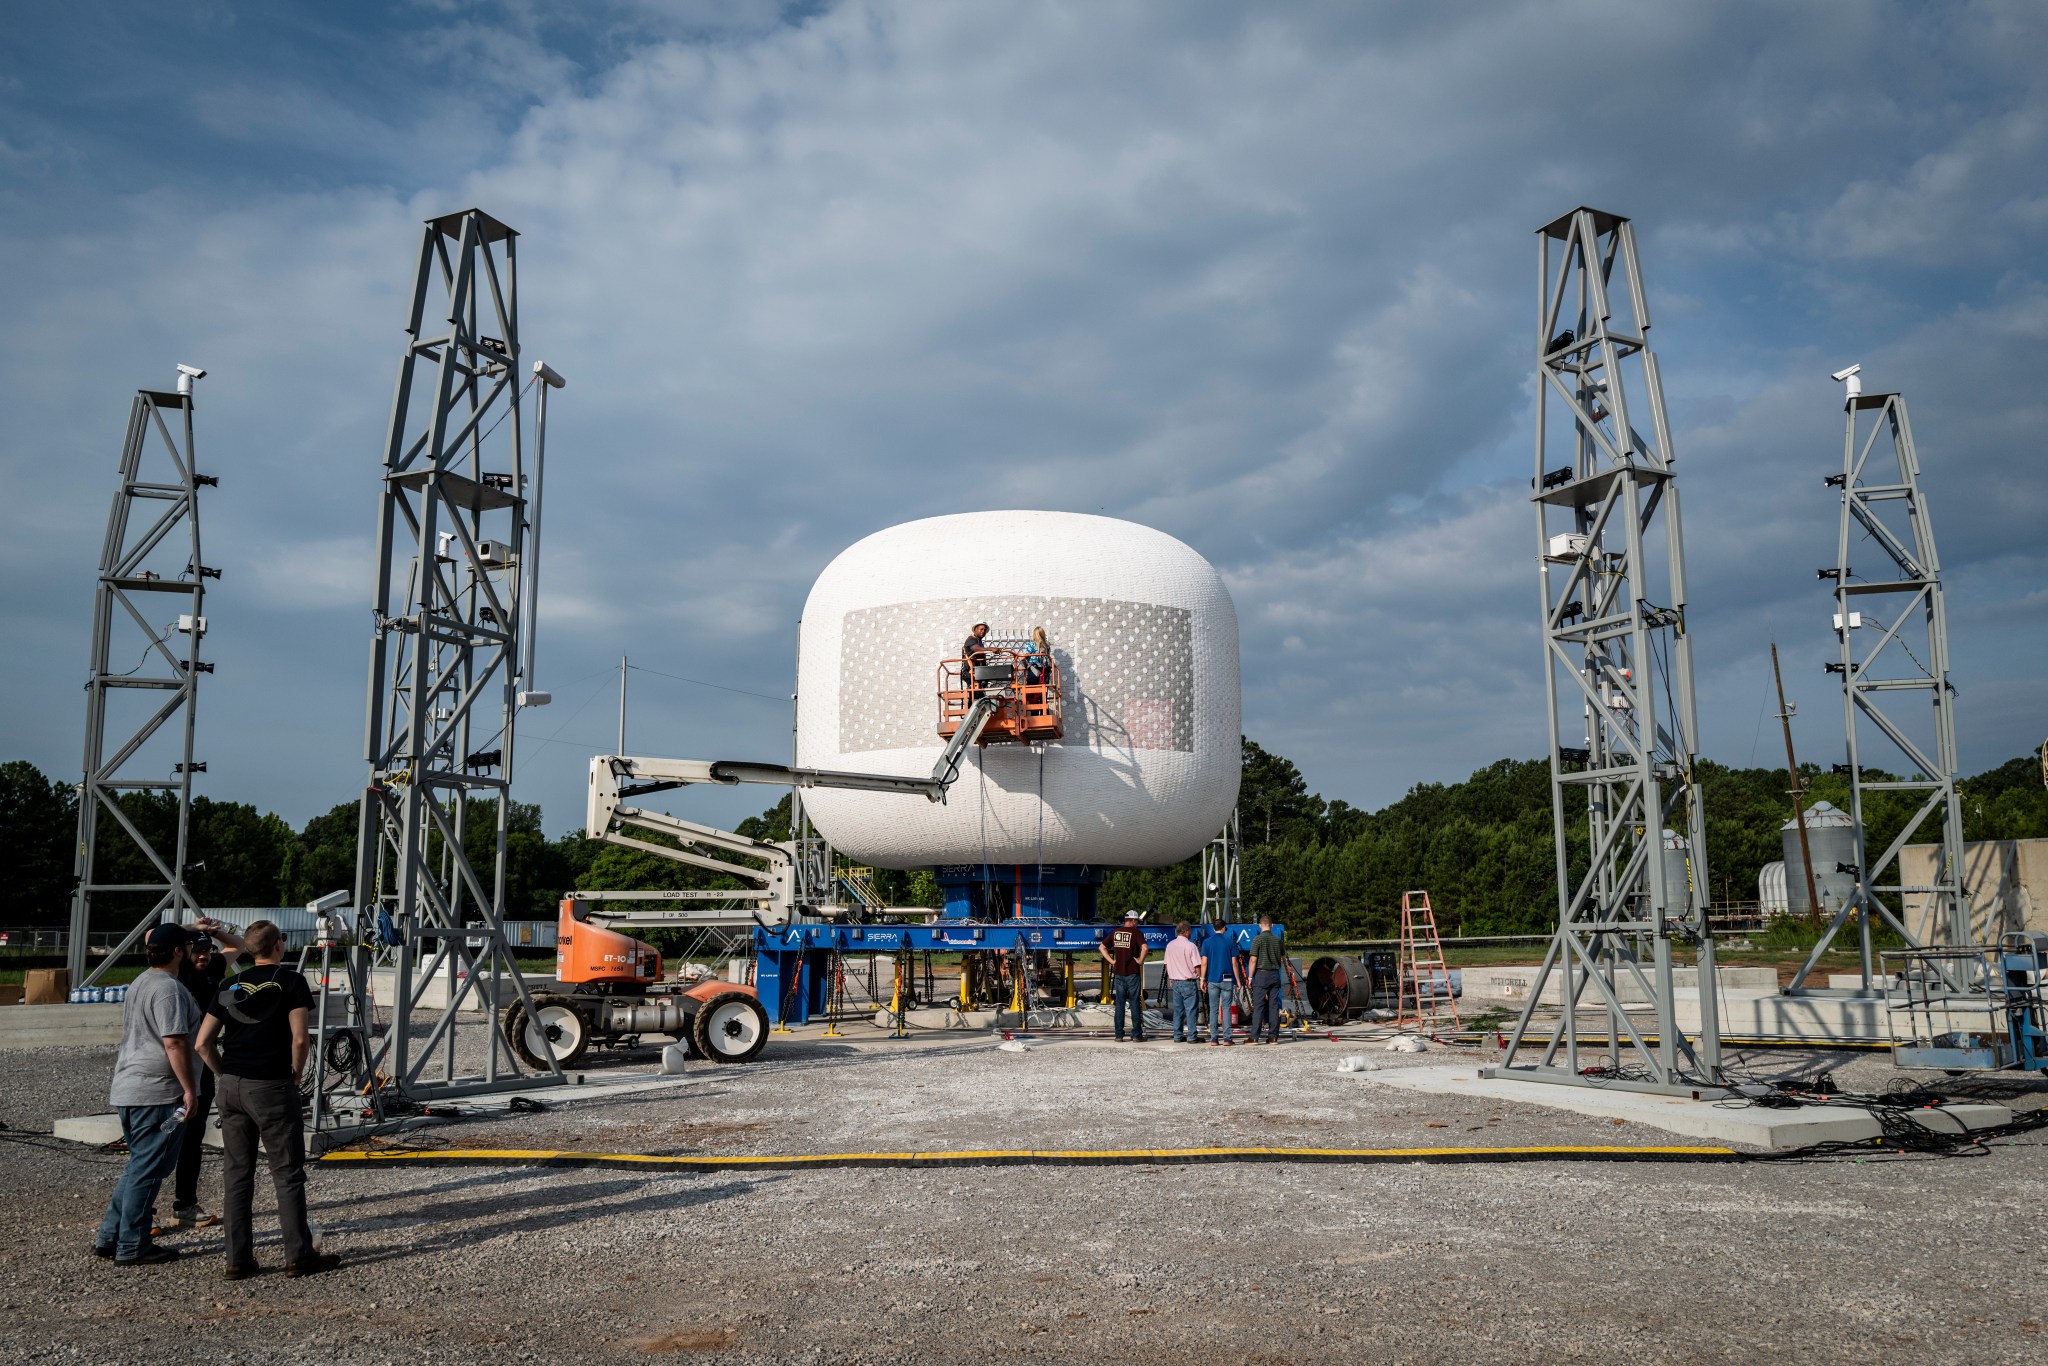 A photograph showing Sierra Space’s LIFE habitat on the test stand at NASA’s Marshall Space Flight Center ahead of a burst test. The LIFE habitat will be part of Blue Origin's commercial destination, Orbital Reef.